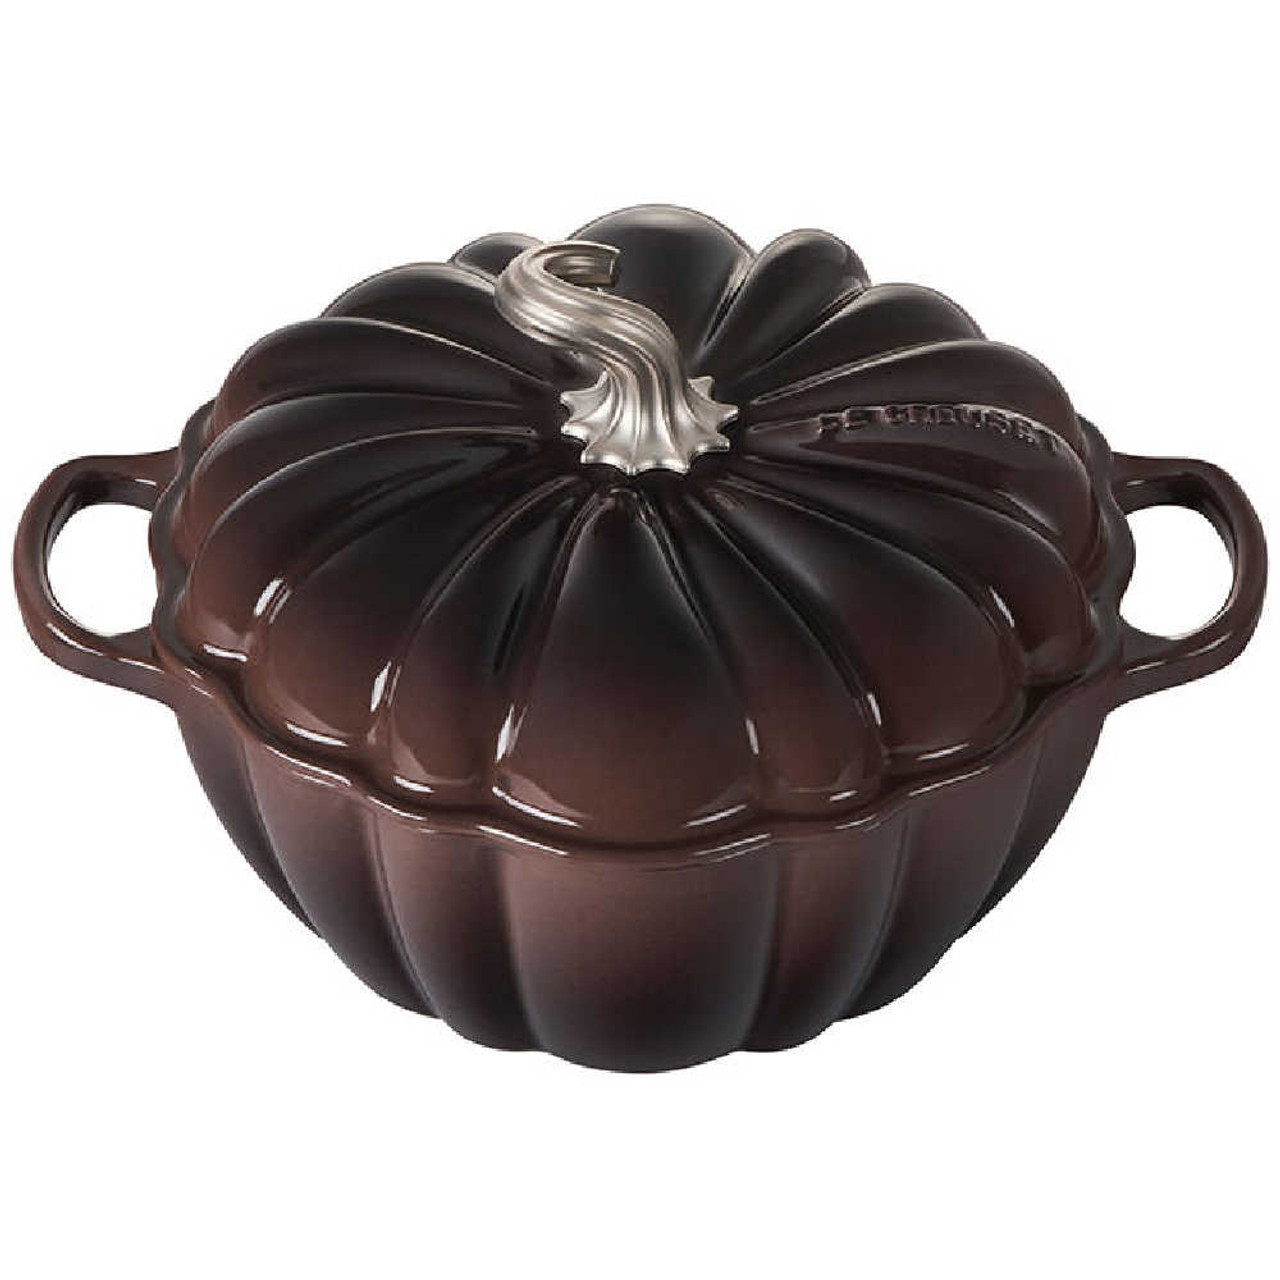 https://cdn11.bigcommerce.com/s-hccytny0od/images/stencil/1280x1280/products/5573/24359/Le_Creuset_Pumpkin_Cocotte_in_Ganache__99972.1691250537.jpg?c=2?imbypass=on